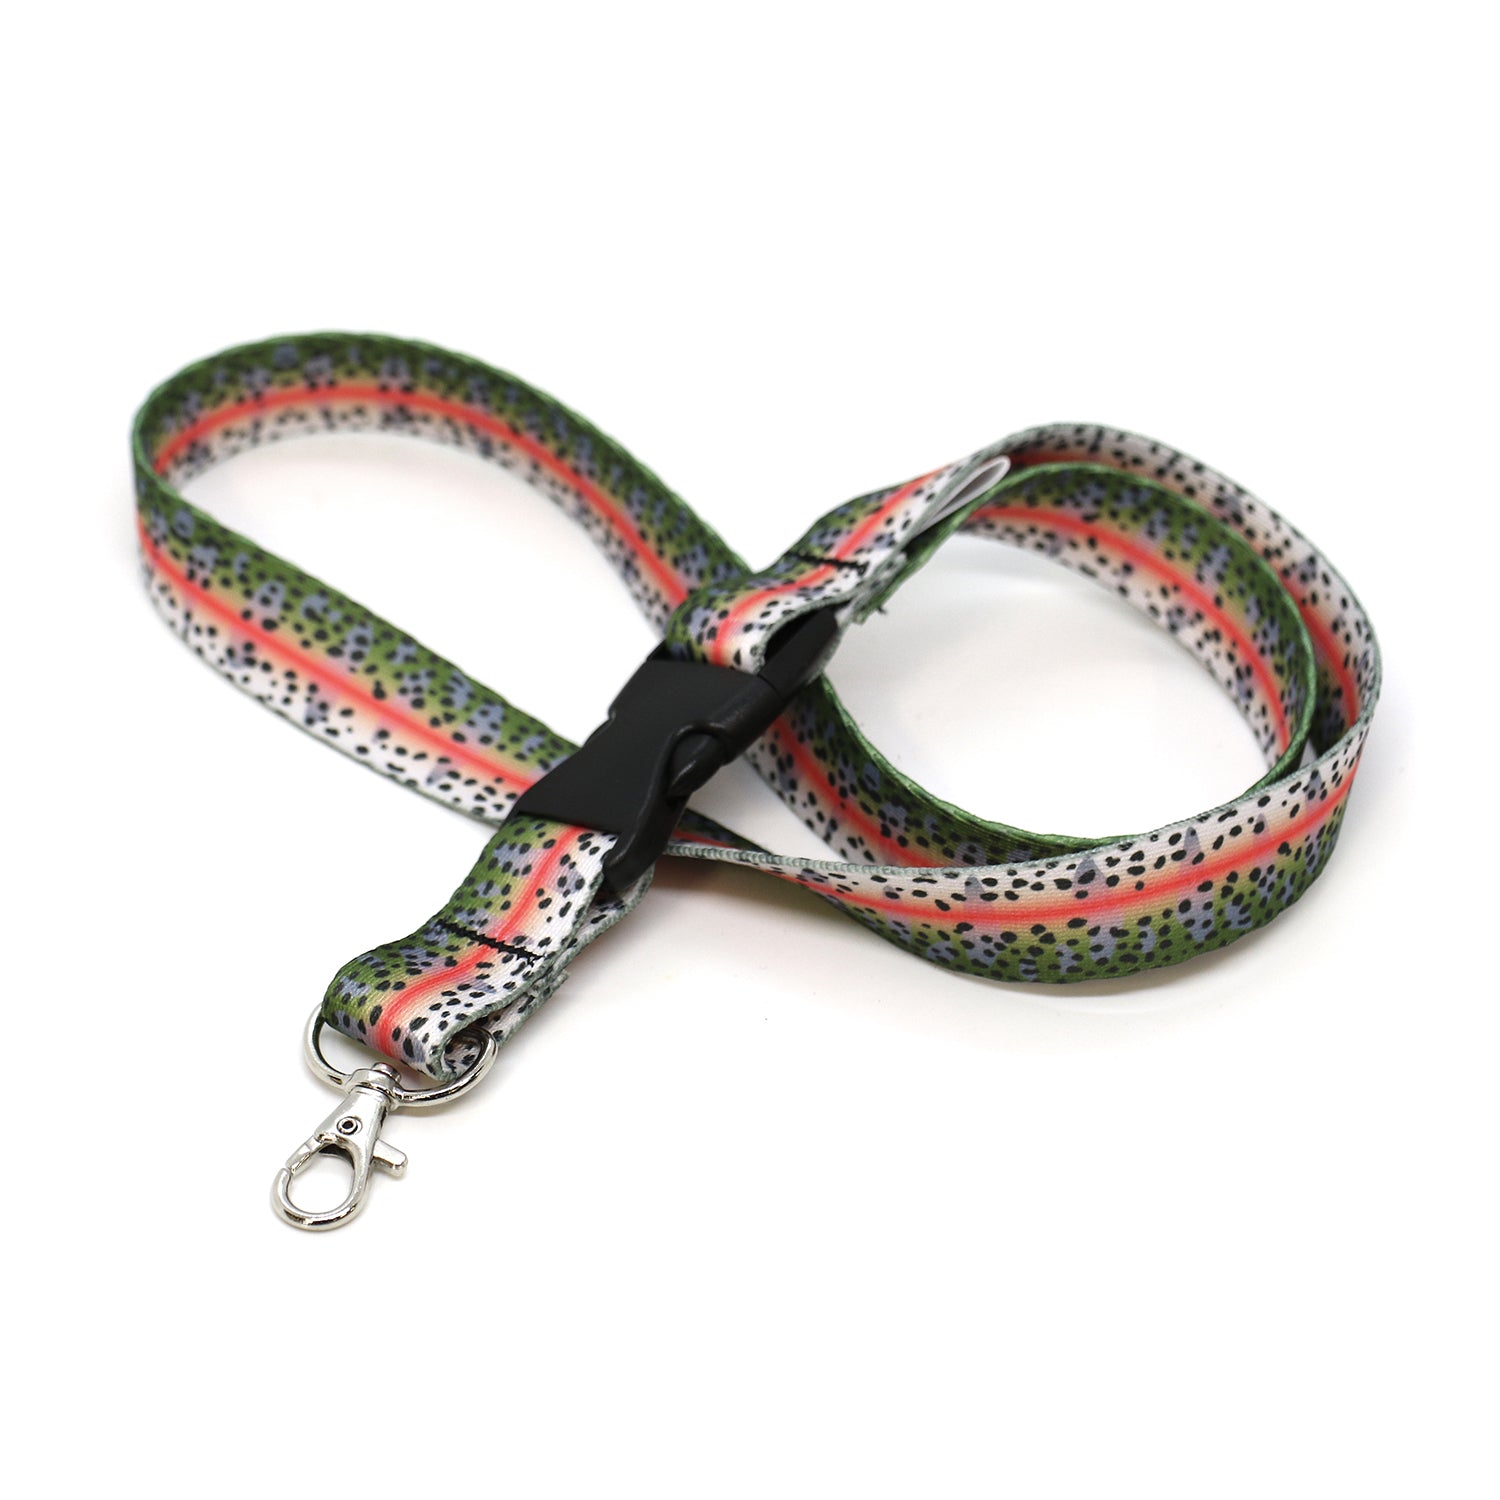 Lanyard with black buckle and silver metal clasp with pattern of a rainbow trout